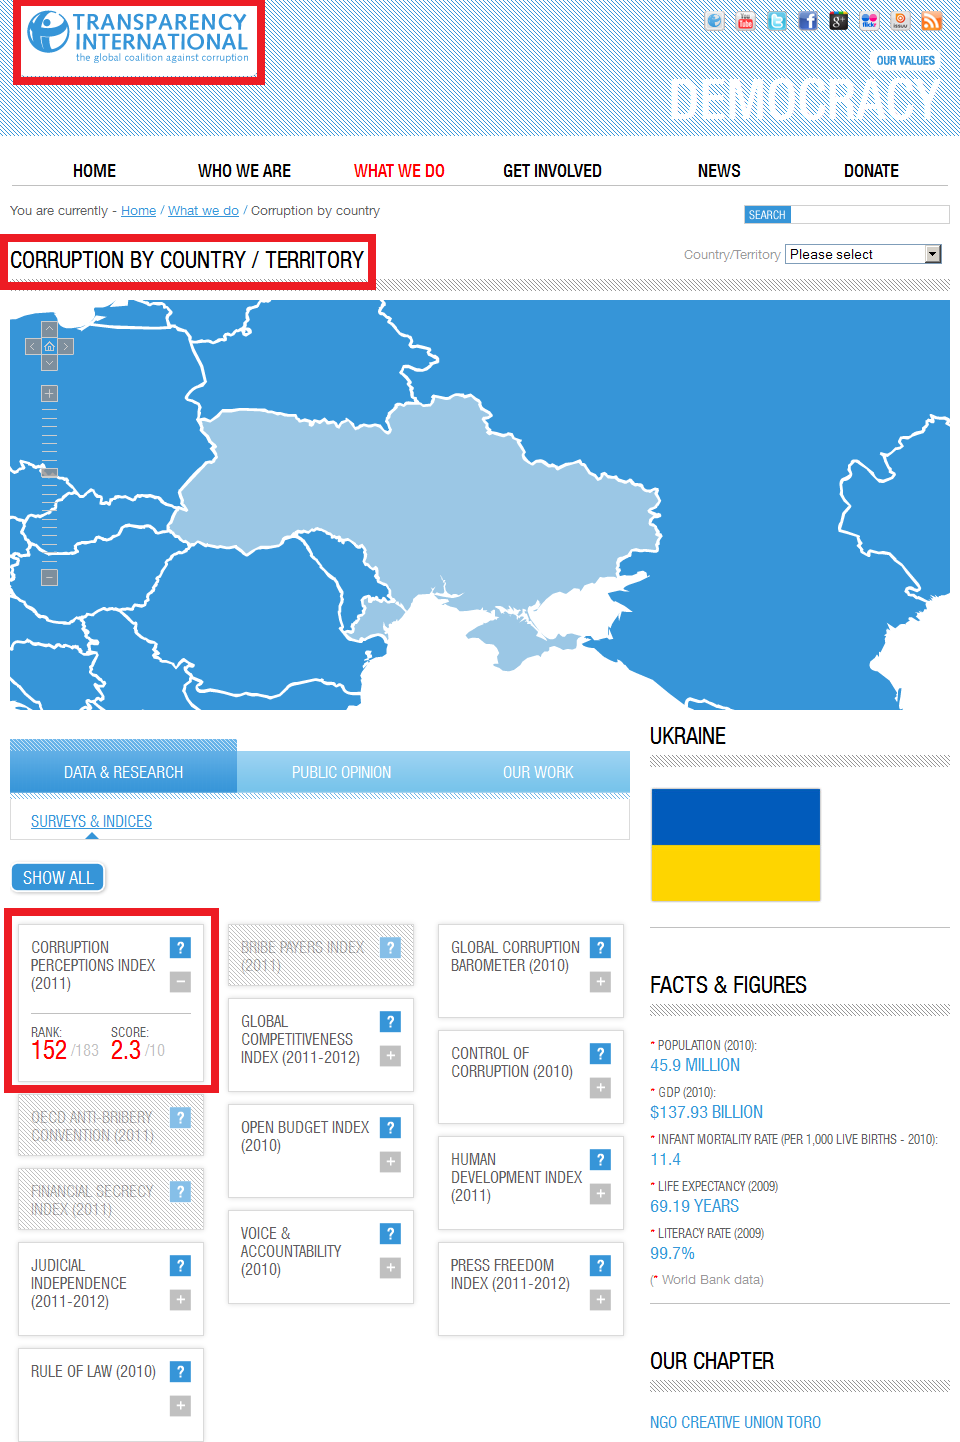 http://transparency.org/country#UKR